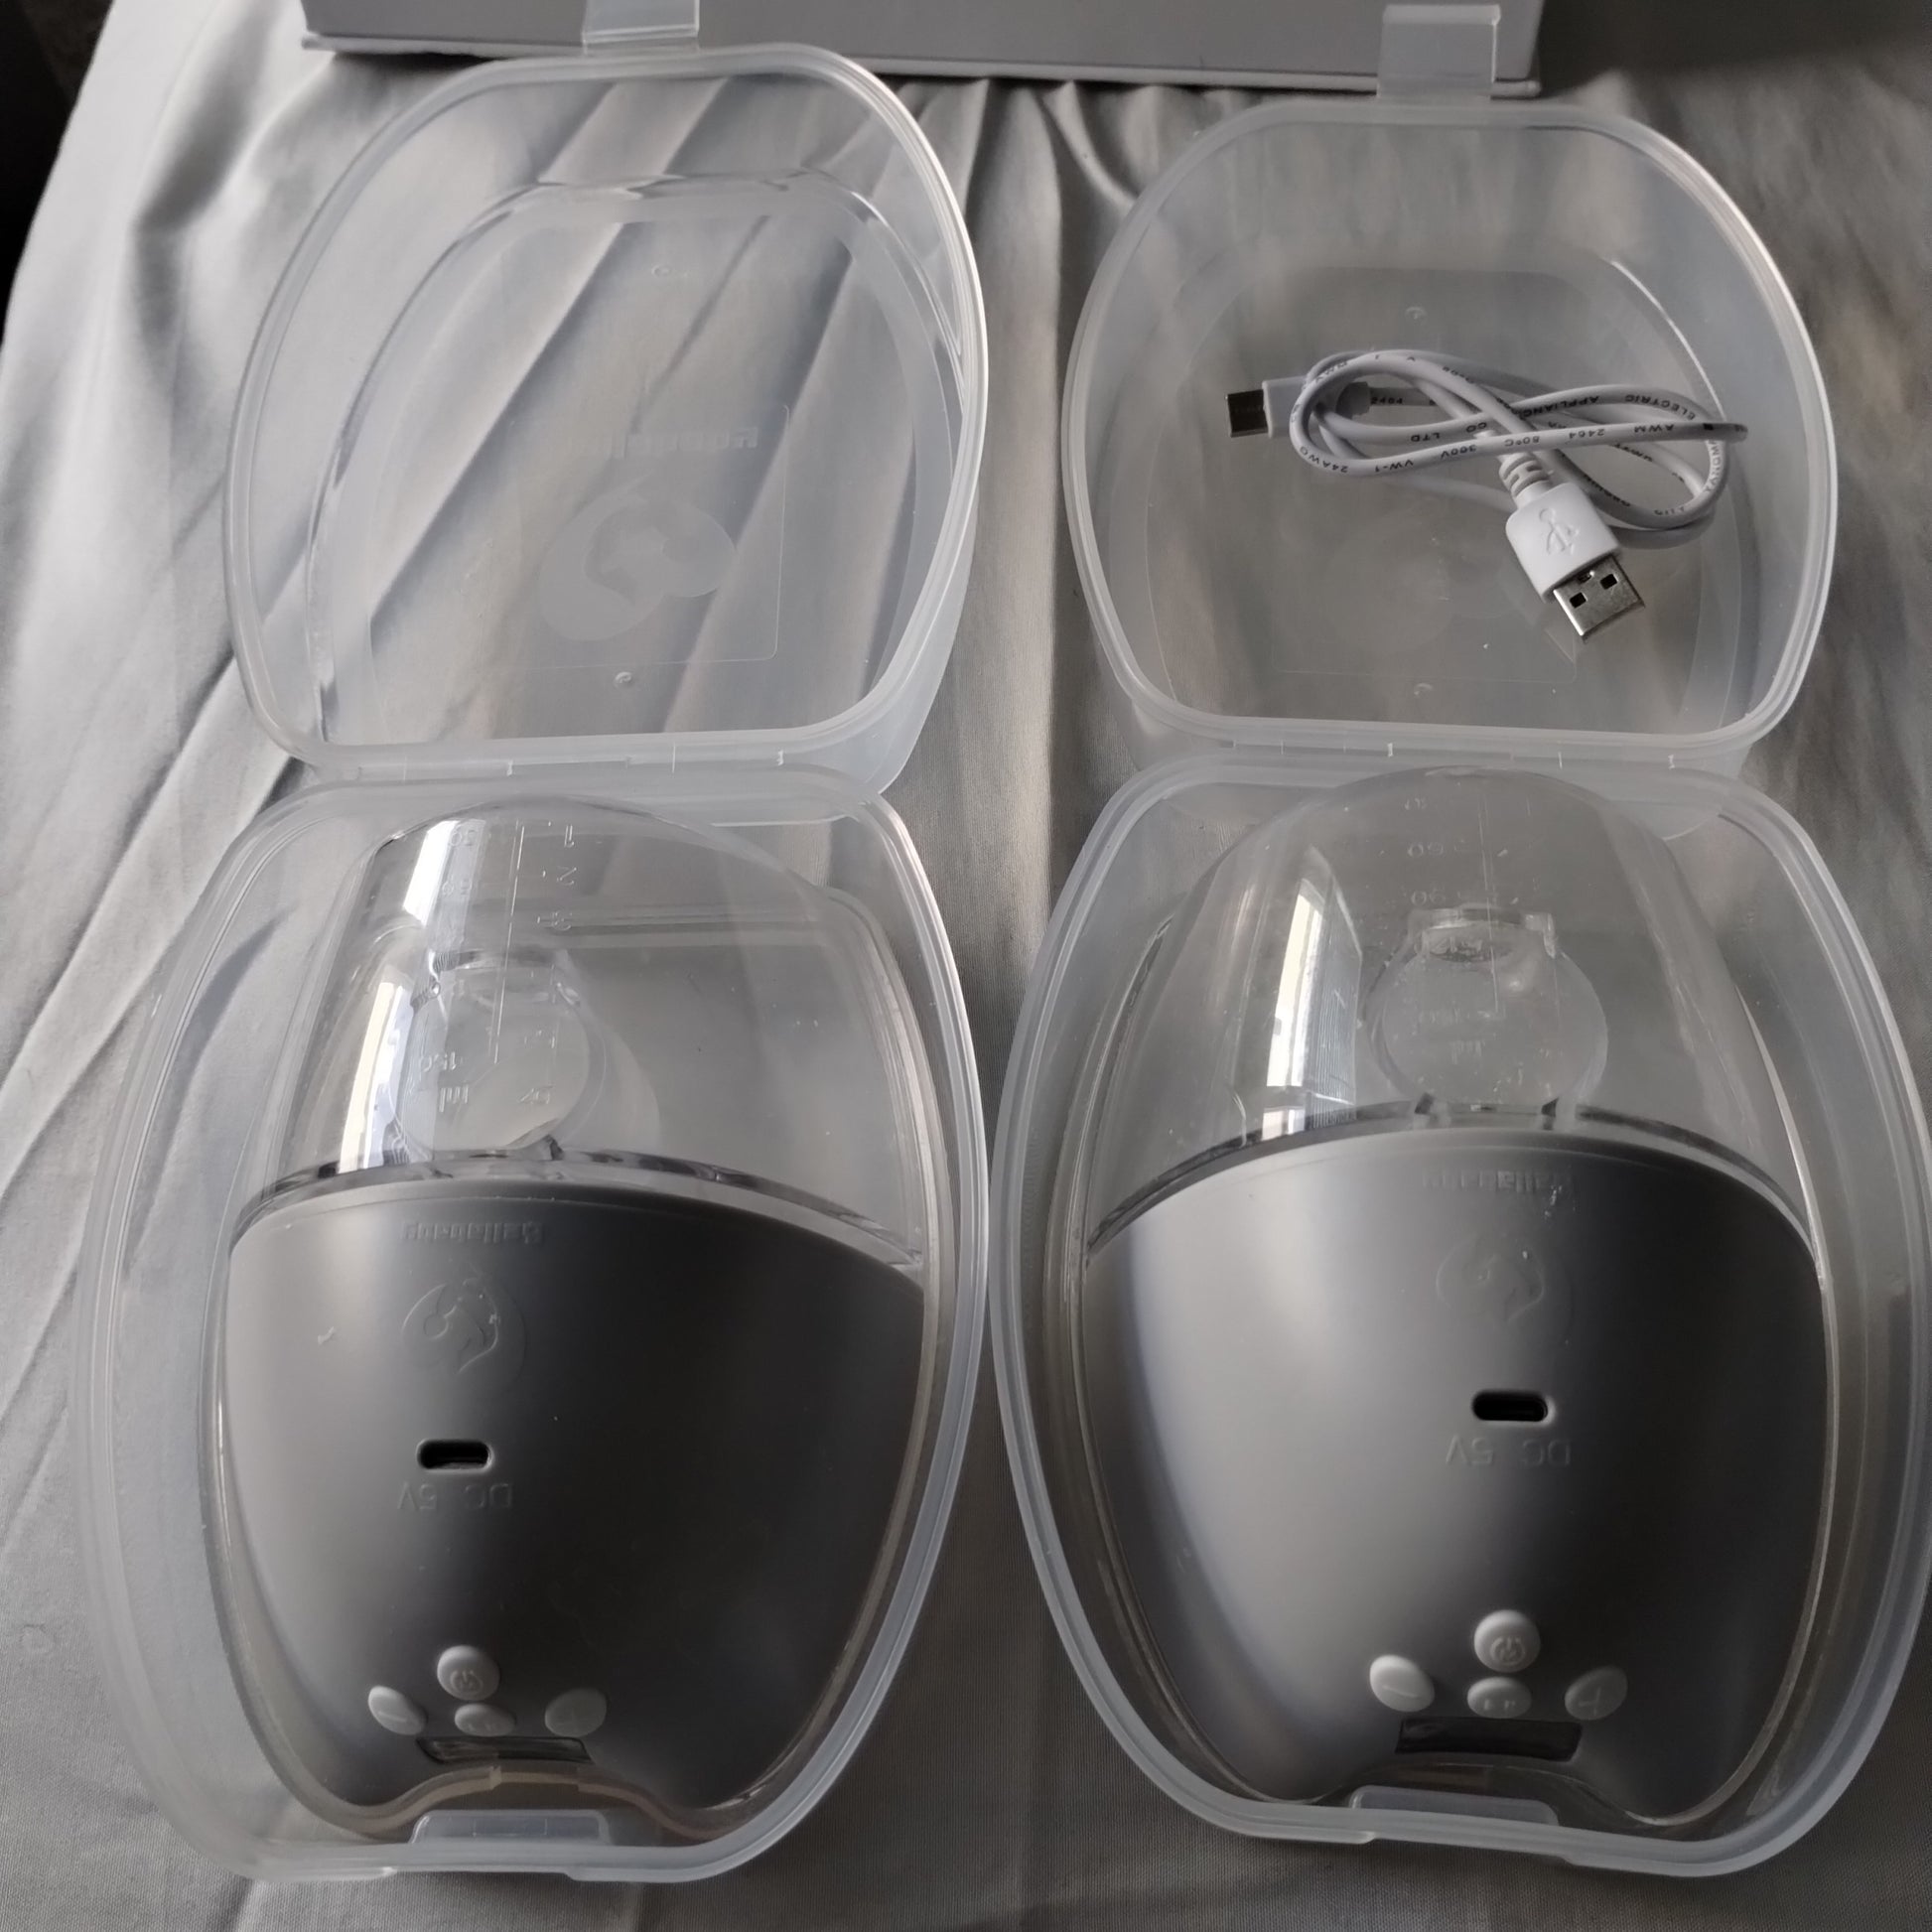 How to assemble Bellababy wearable breast pump 